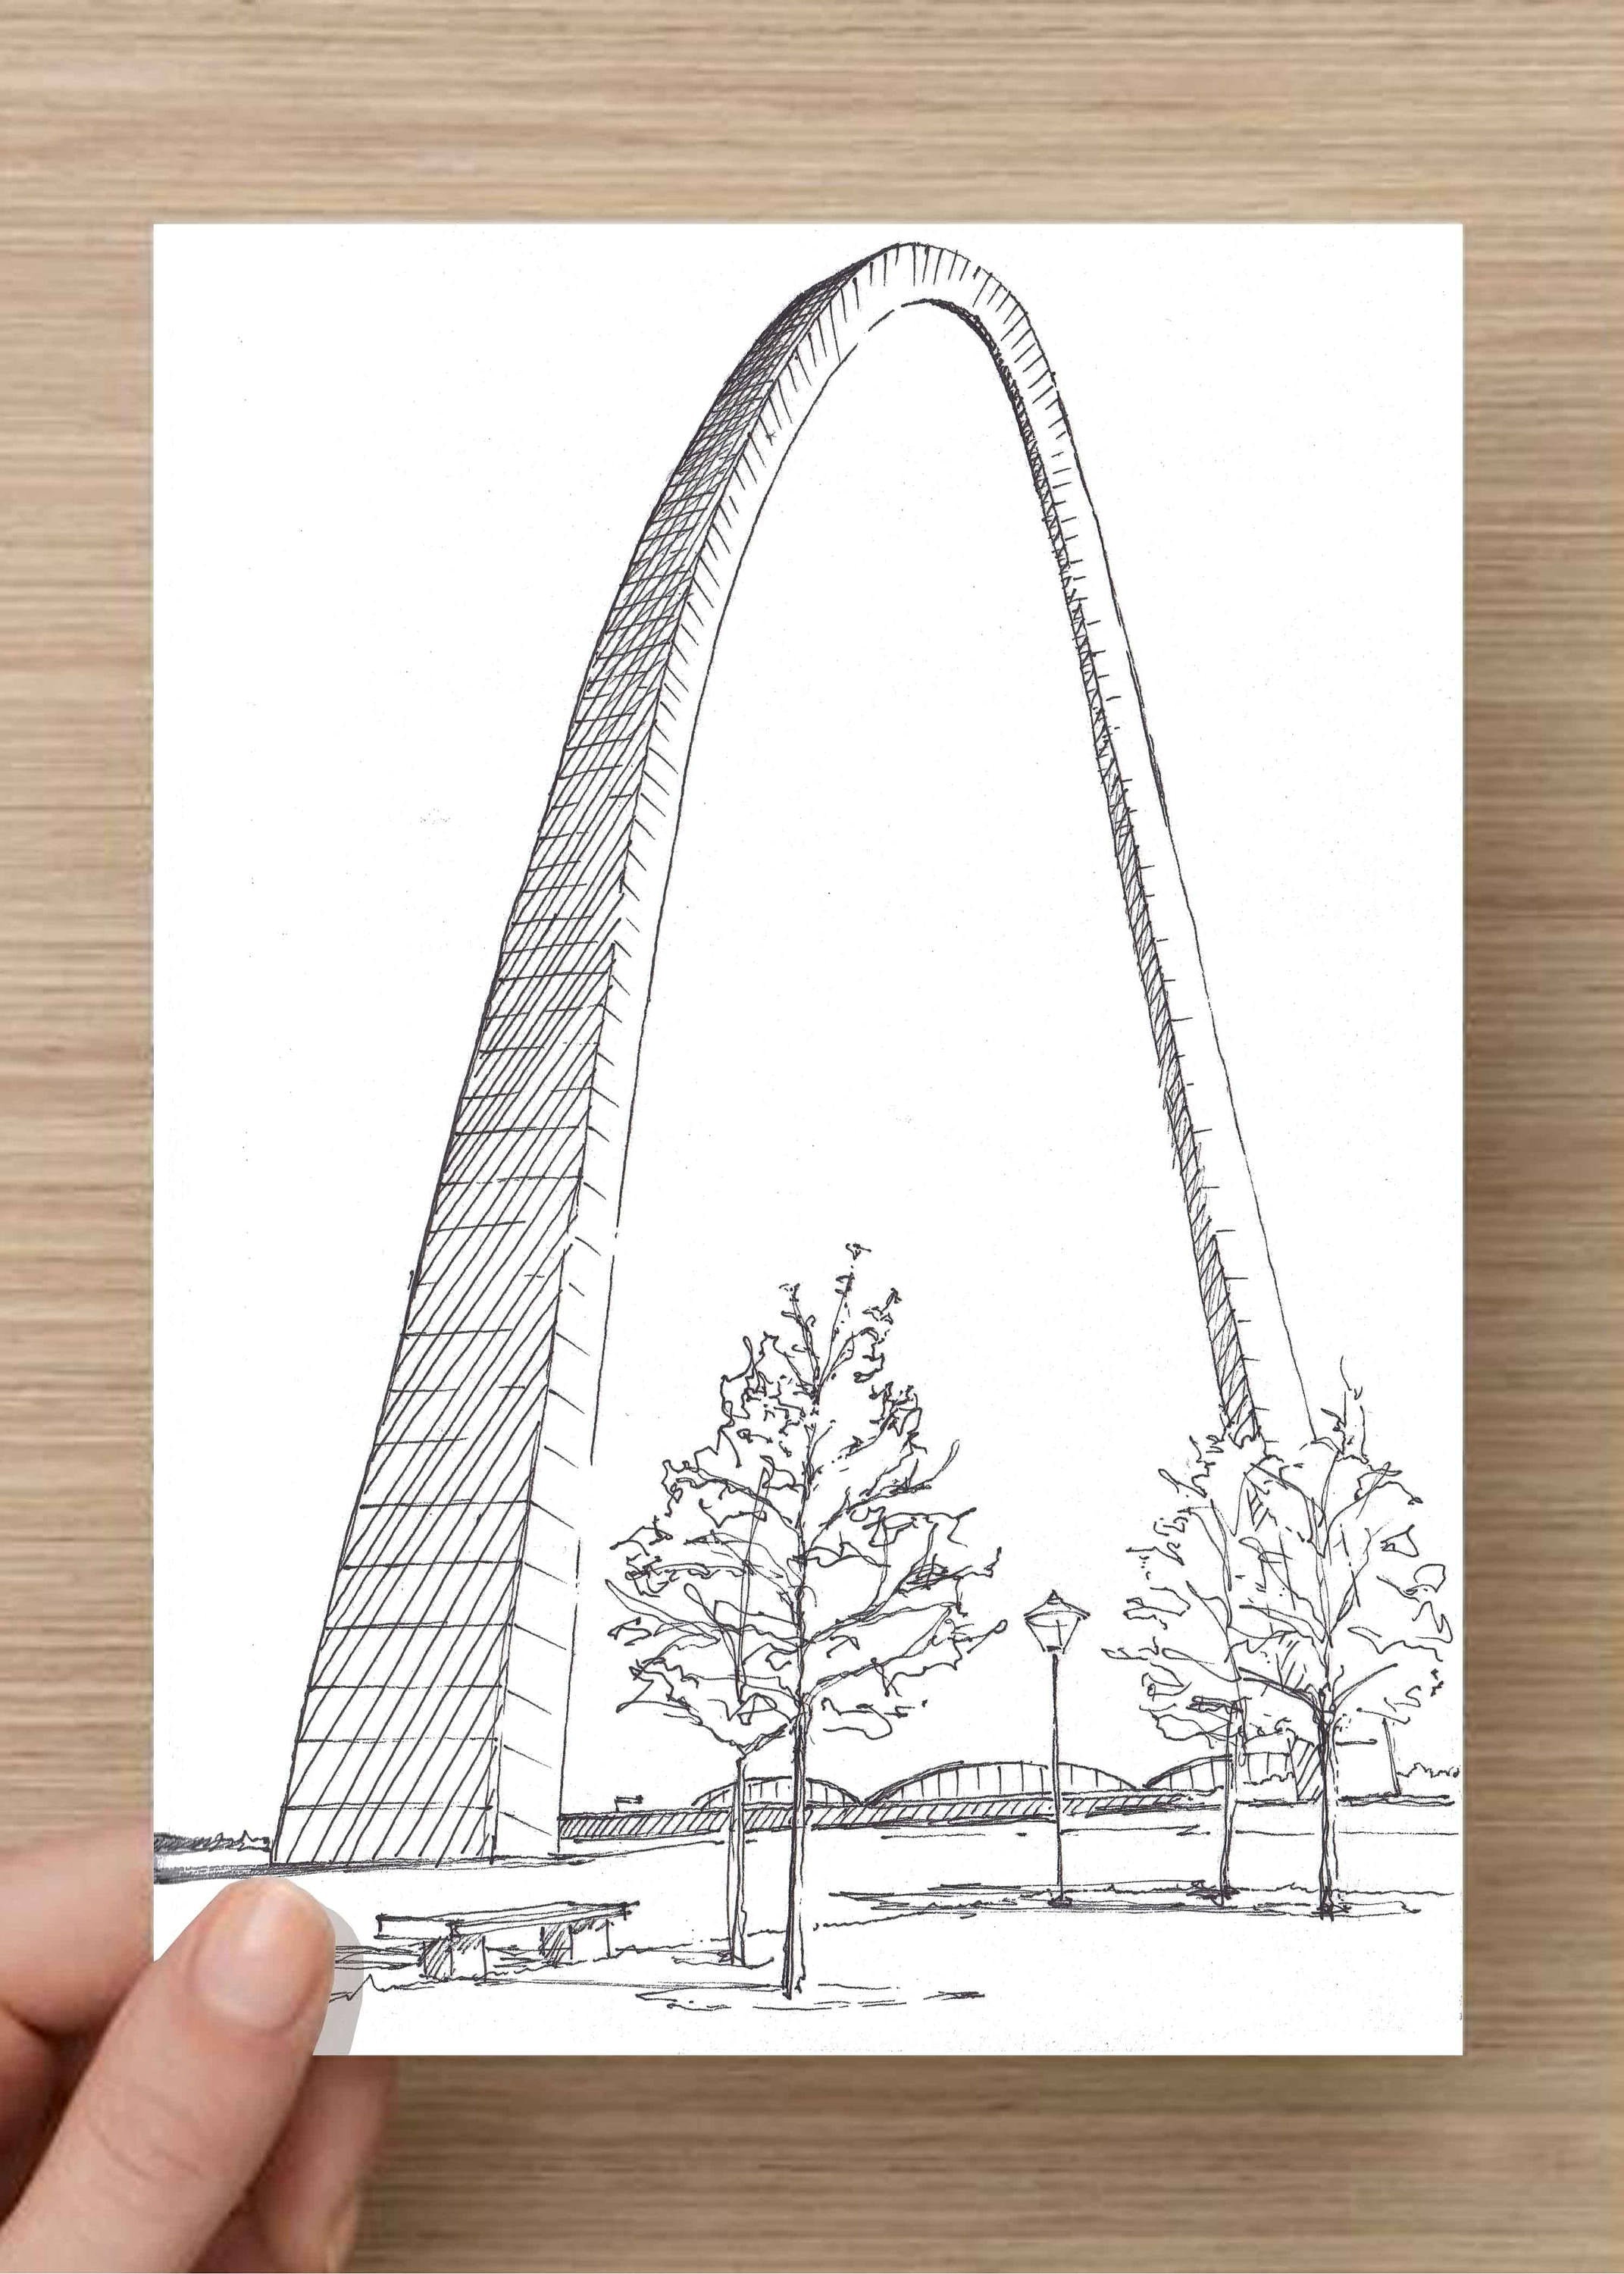 ST LOUIS ARCH in St. Louis, Missouri - Public Art, National Park, Drawing,  Art, Architecture, Monument, Art Print, Drawn There